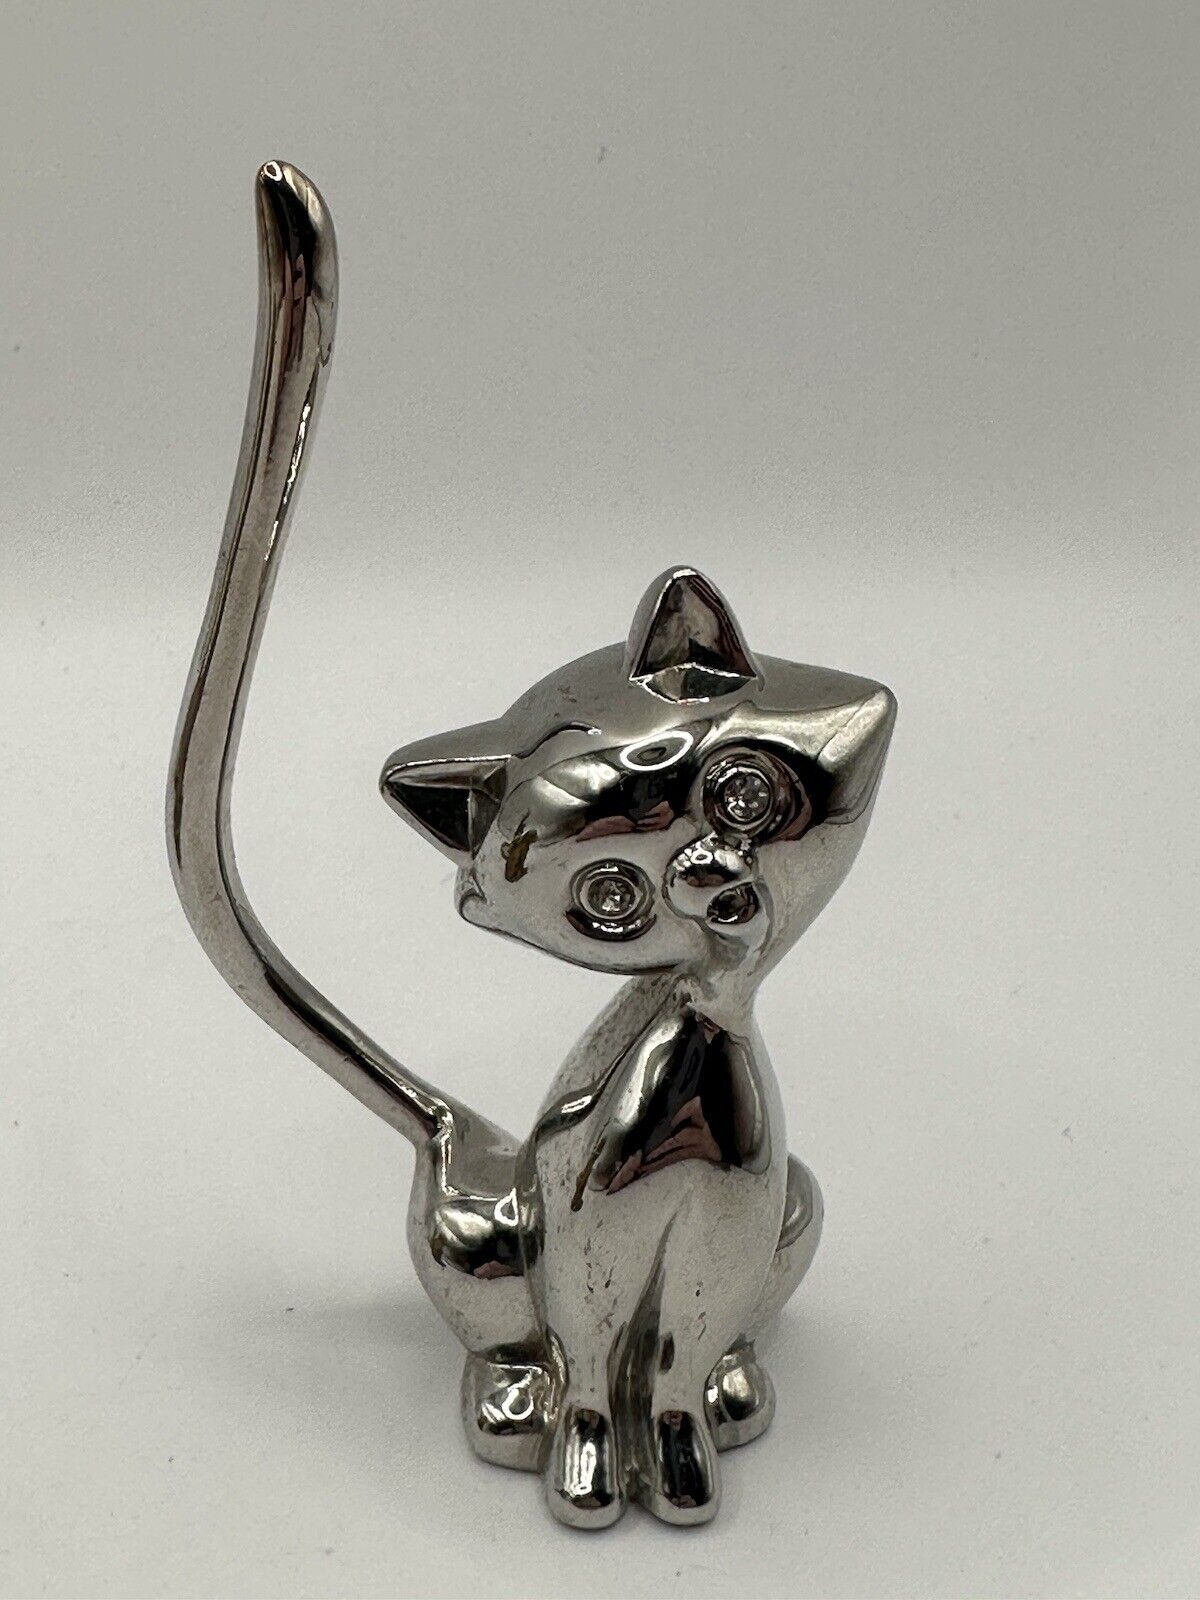 ADORABLE SILVER PLATED CAT RING HOLDER. THE CAT FIGURE IS HOLLOW